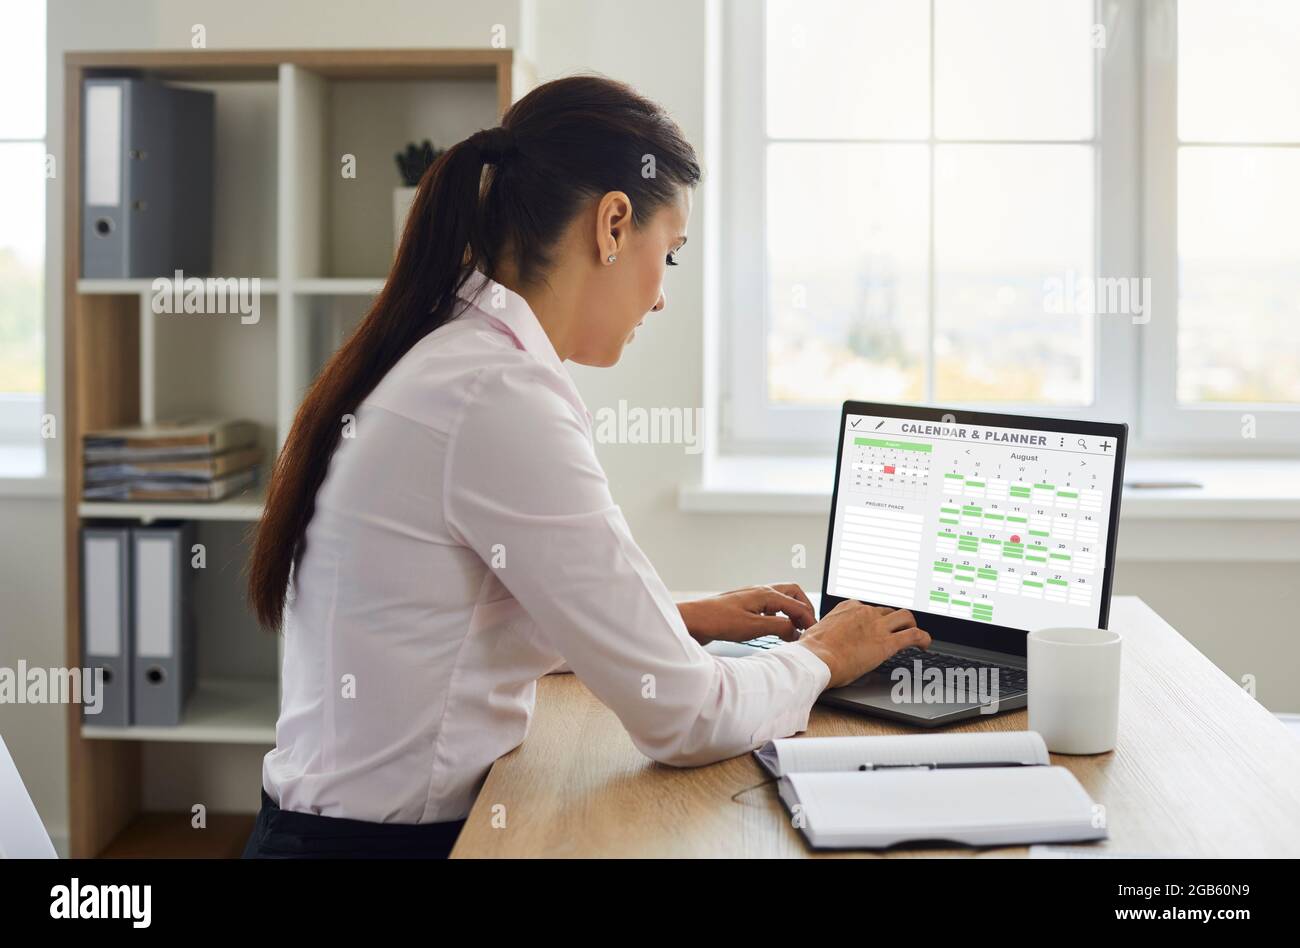 Woman organizing her work schedule using Calendar and Planner on laptop computer Stock Photo